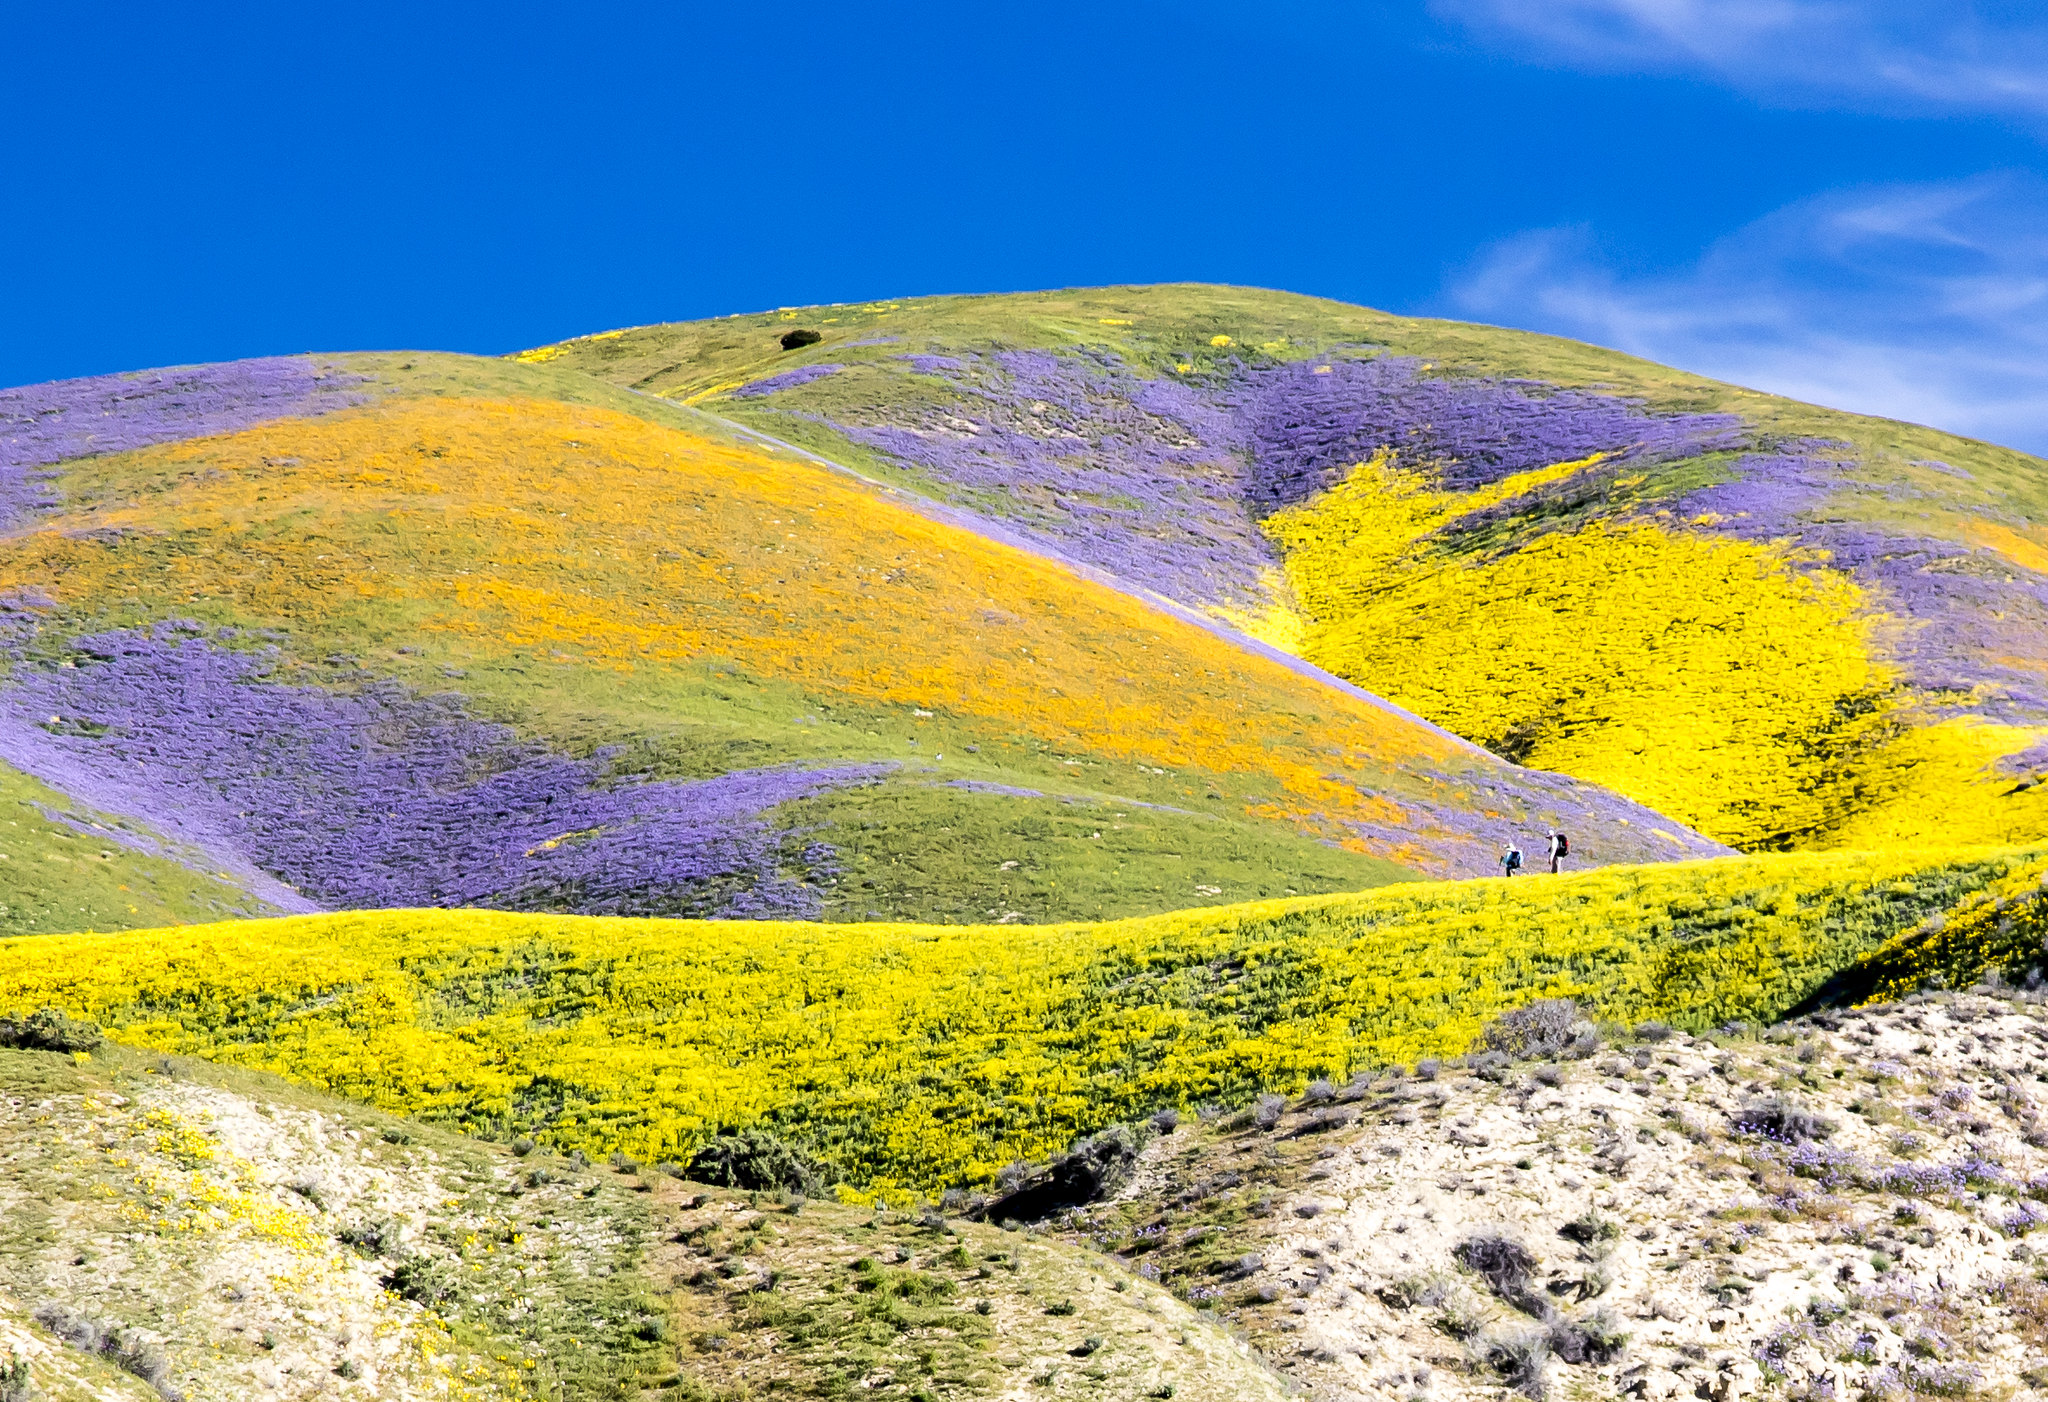 Yellow and purple flowers cover a hill at Carrizo Plain National Monument.